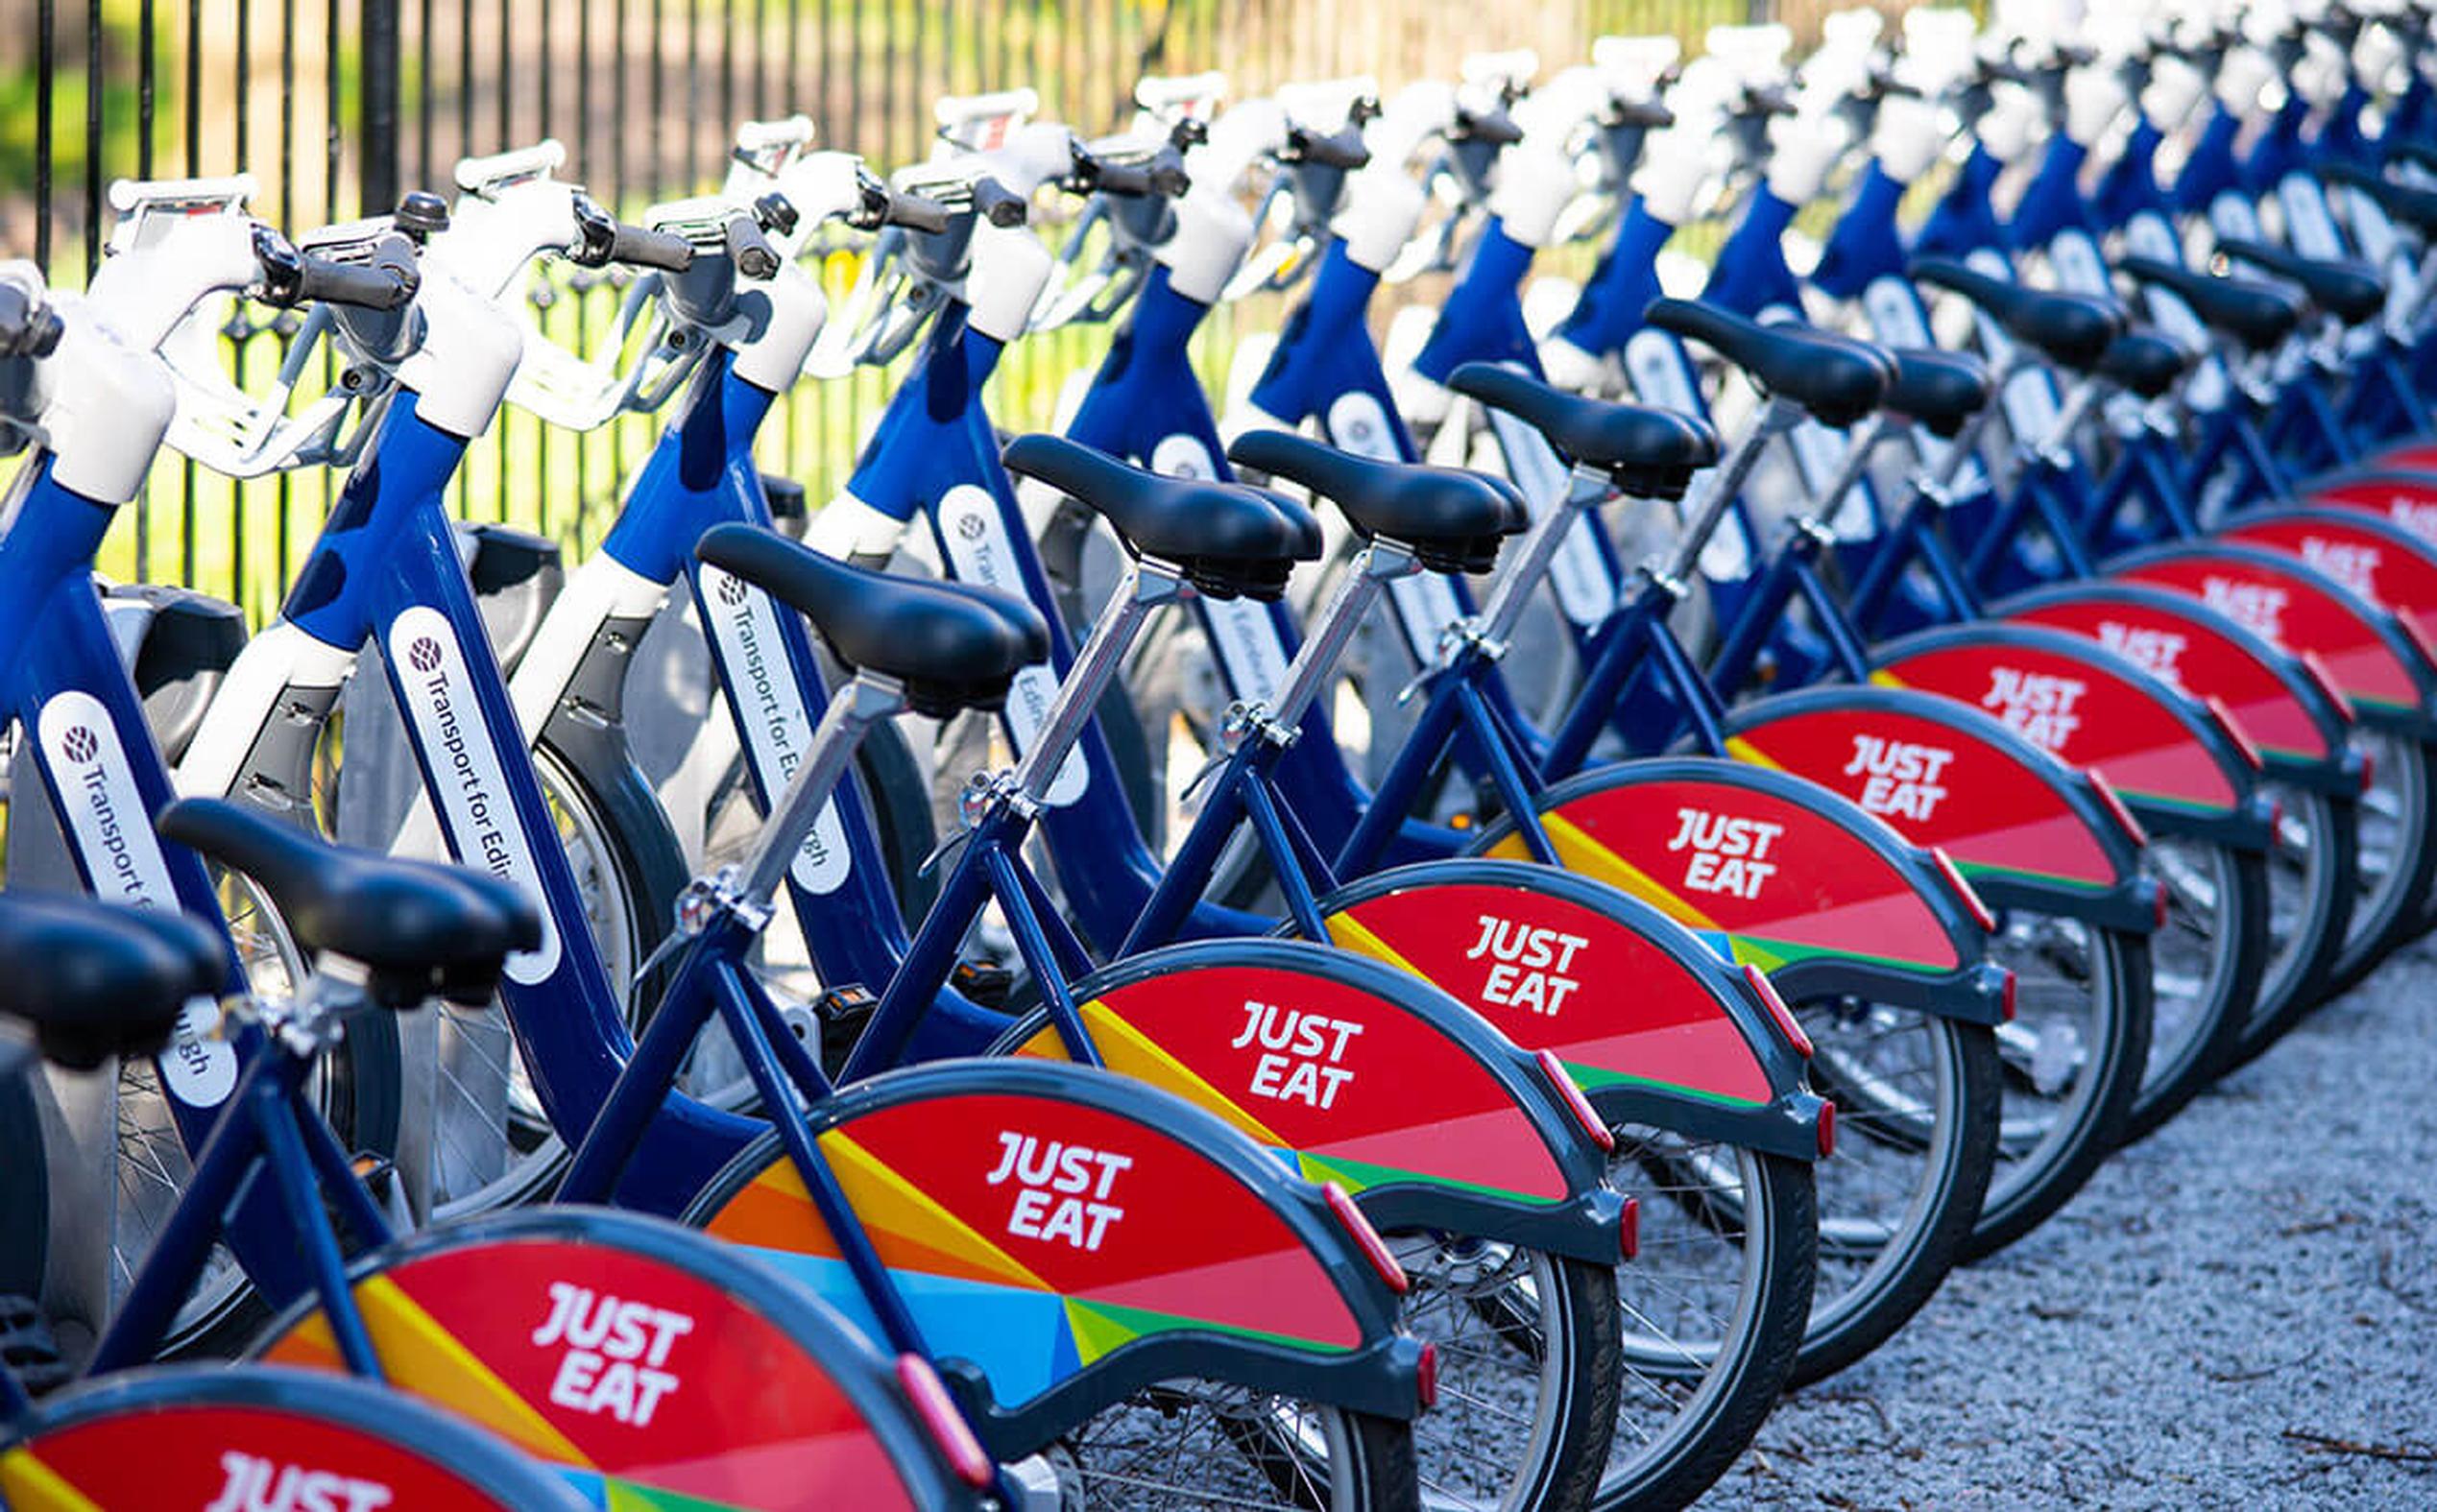 The Edinburgh Cycle Hire scheme is sponsored by Just Eat